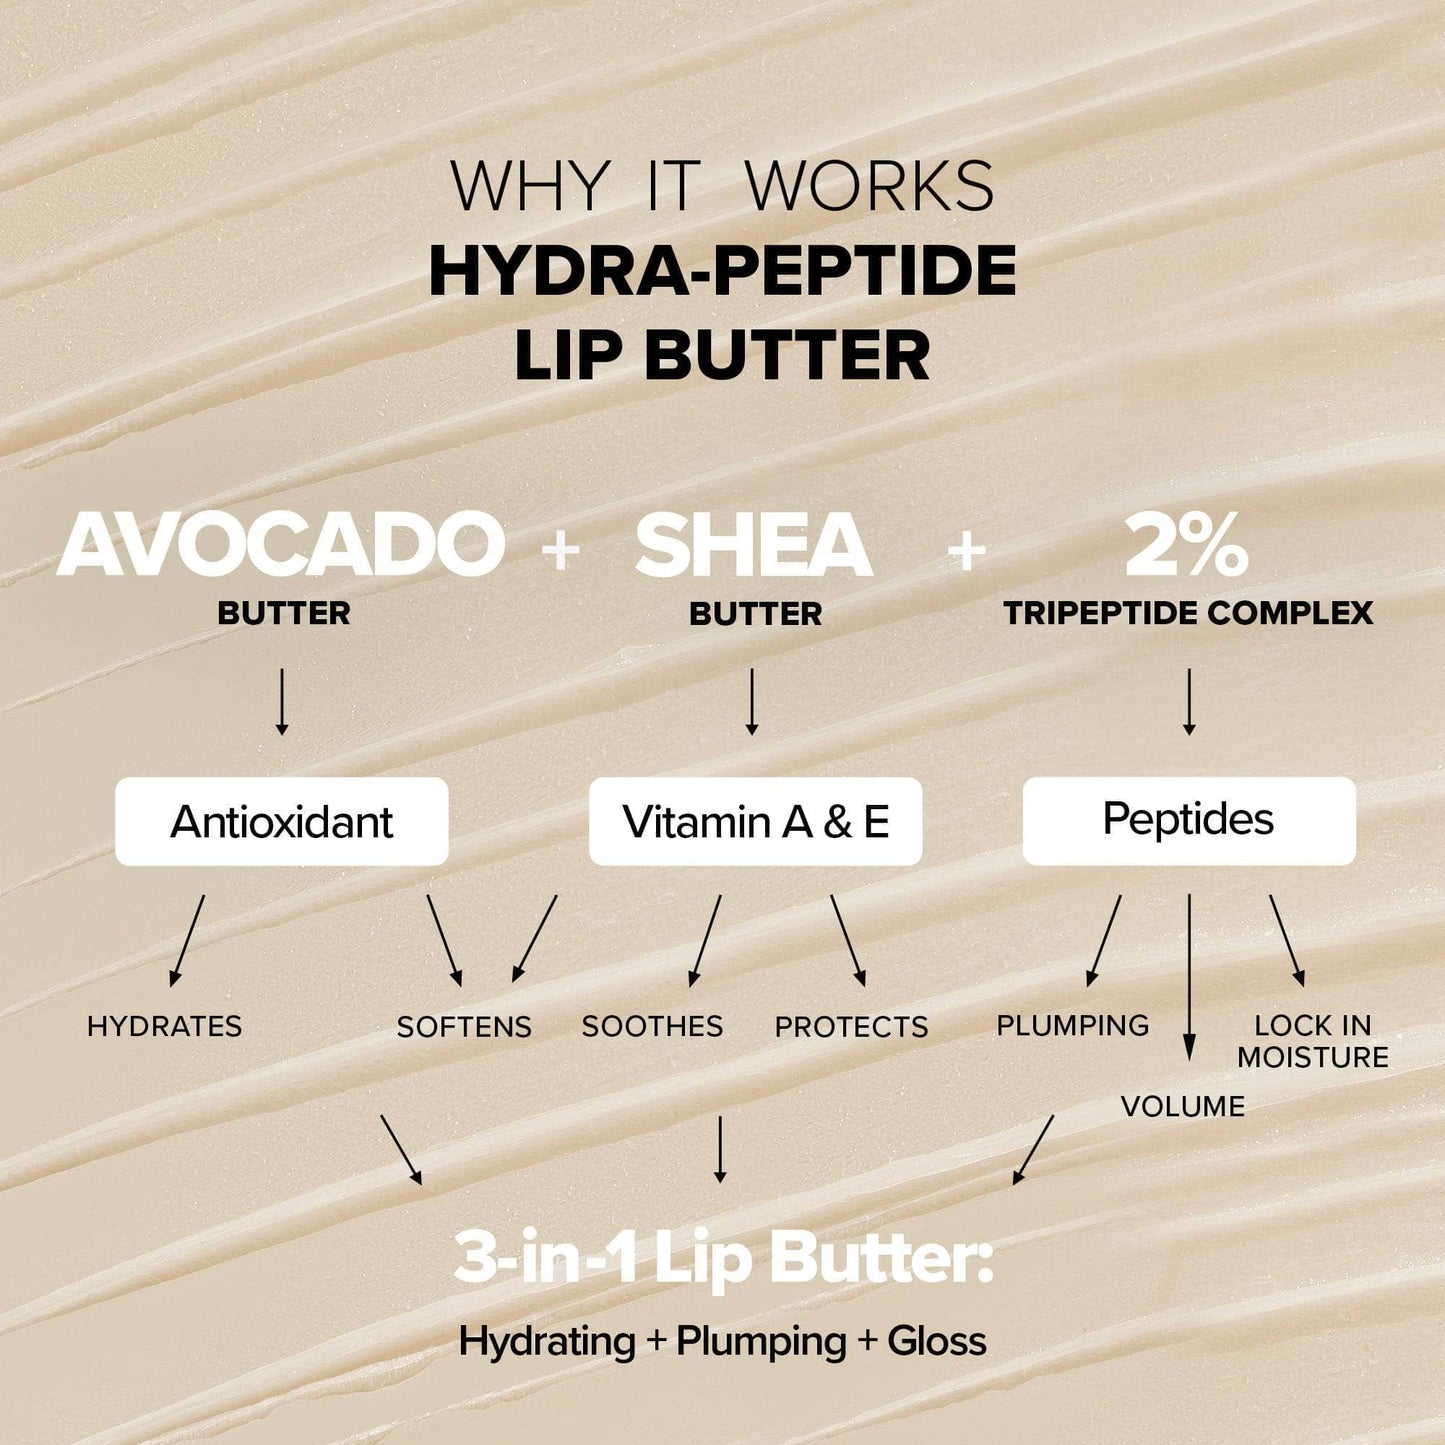 Hydra-Peptide Lip Butter Dolce Nude. Why it works description. 